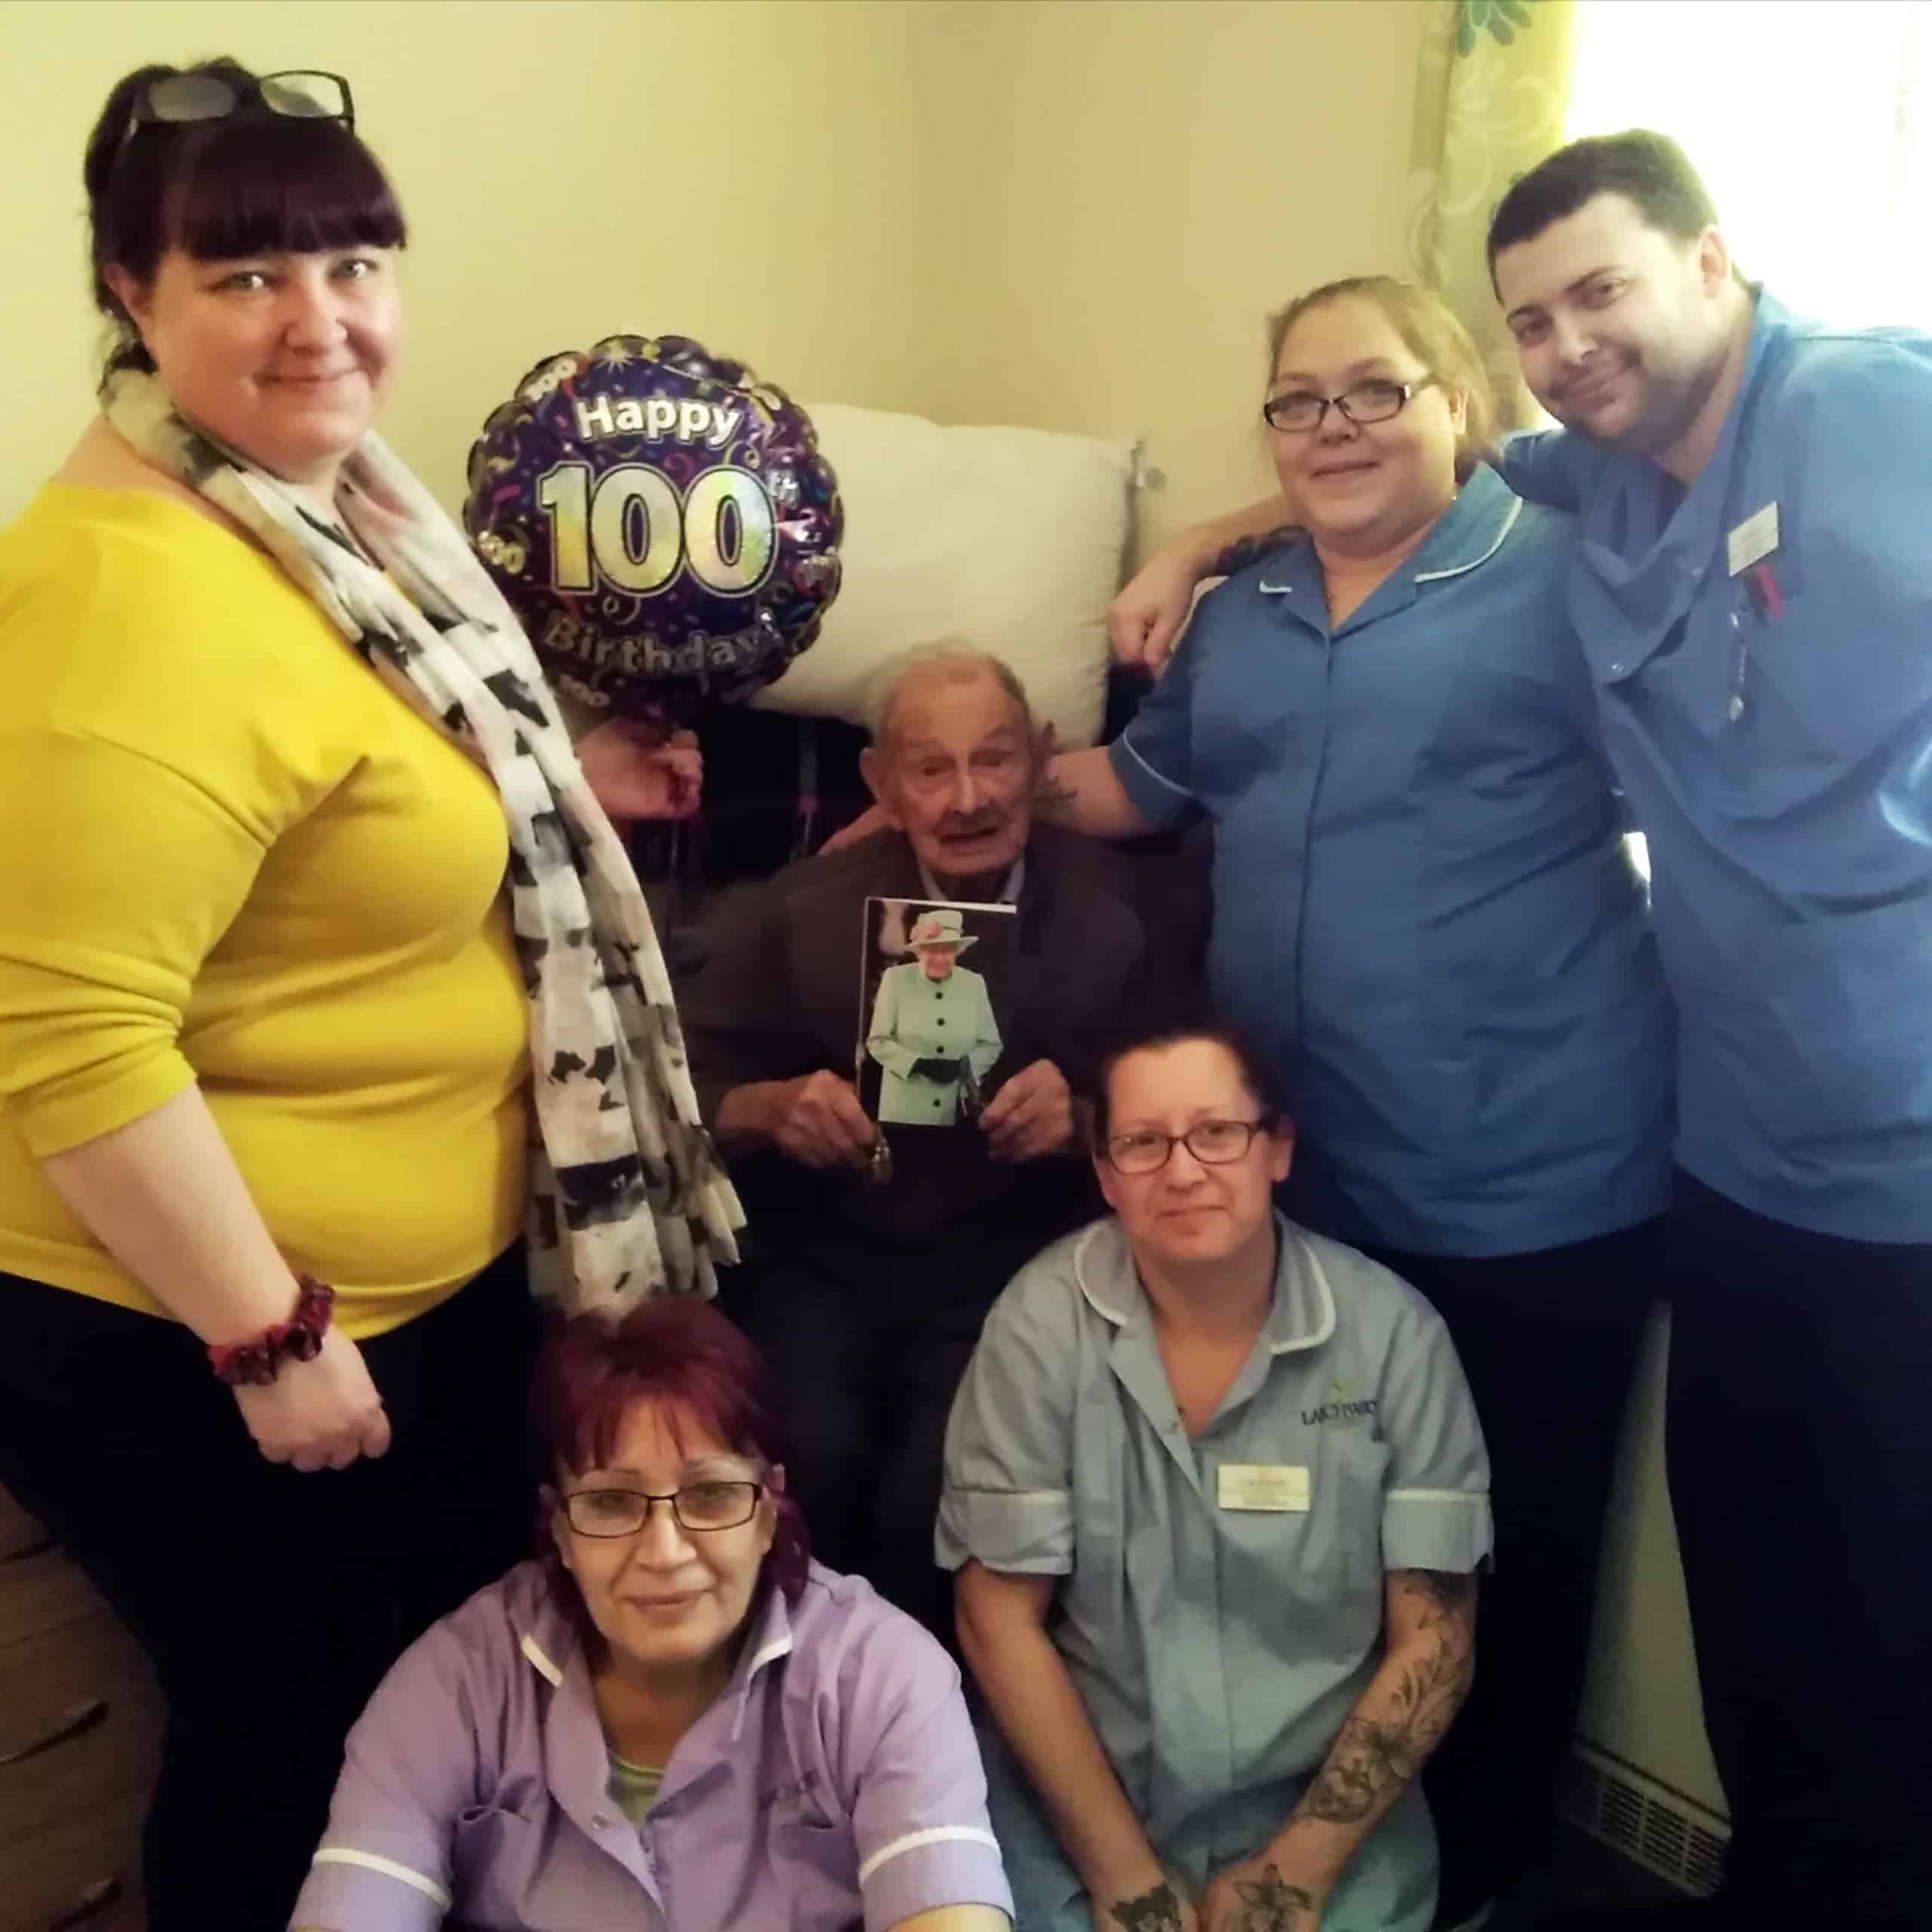 Cameron House Care Home resident Bill Fredrick celebrates his 100th birthday with telegram from Her Majesty the Queen.